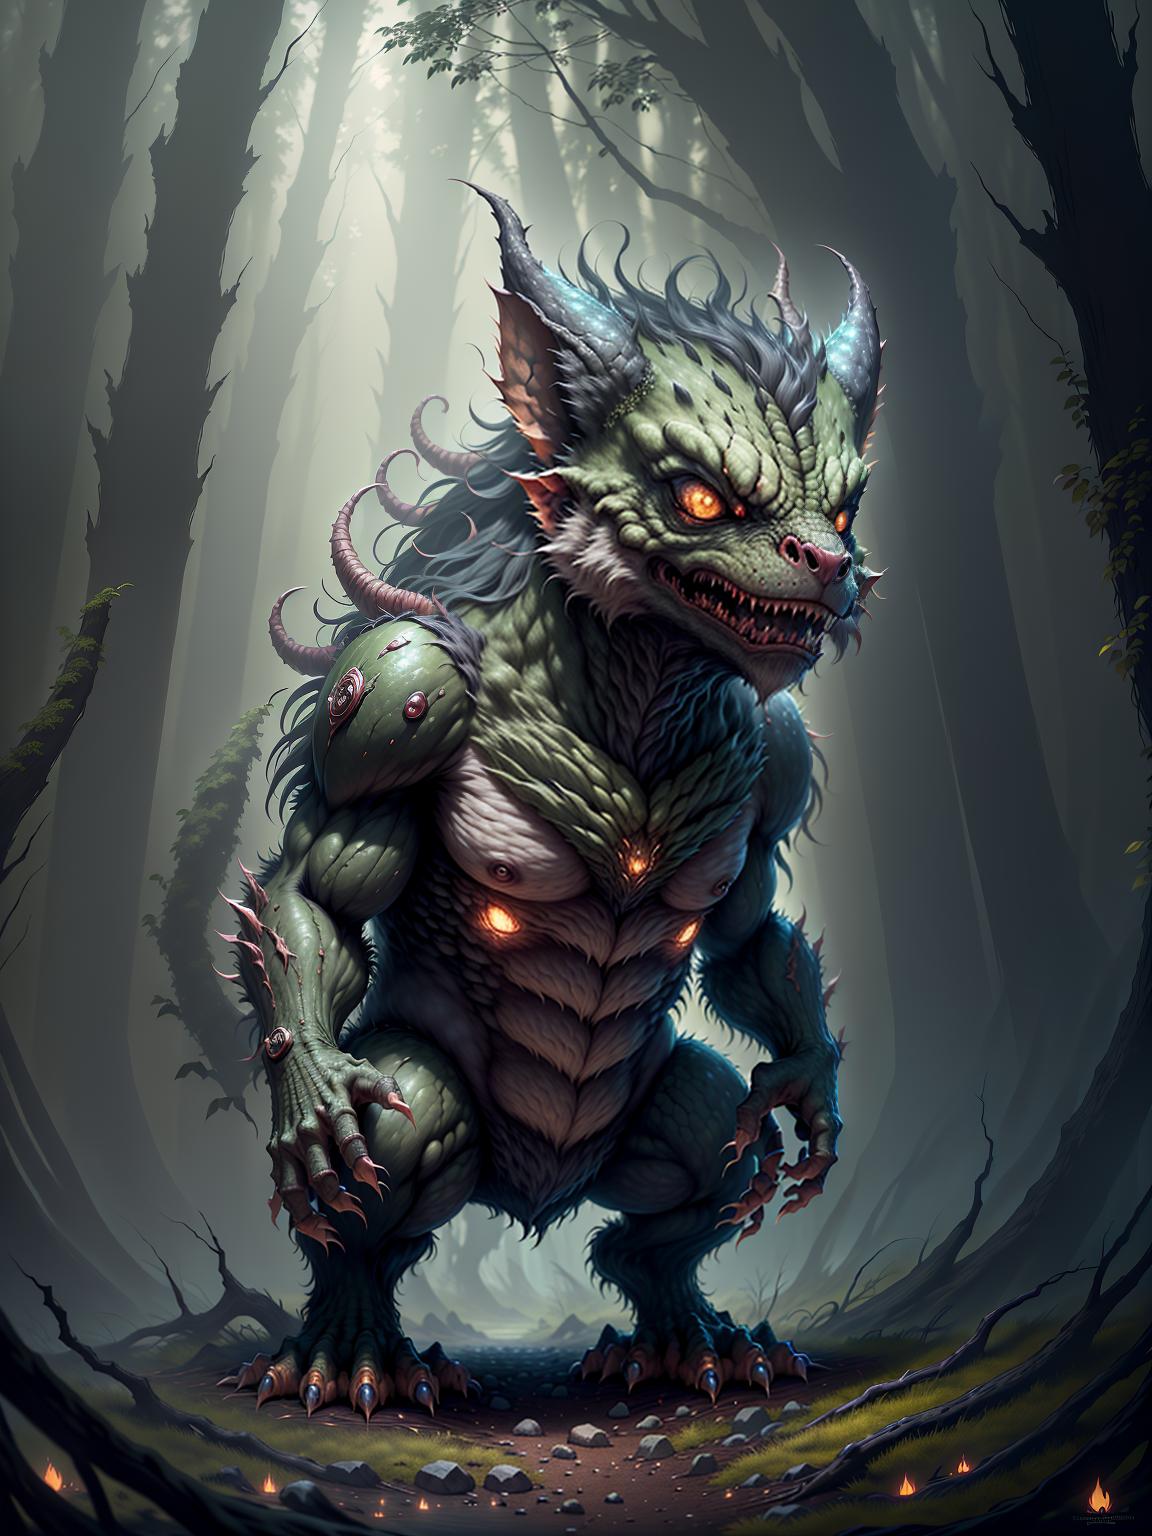  master piece, best quality, ultra detailed, highres, 4k.8k, A fierce chimera beast, Roaring, standing fiercely, Ferocious, BREAK A monstrous creature terrorizes the forest., Dark and enchanted forest, Twisted trees, eerie mist, BREAK Foreboding and eerie, Glowing eyes, ominous shadows, creature00d,Cu73Cre4ture